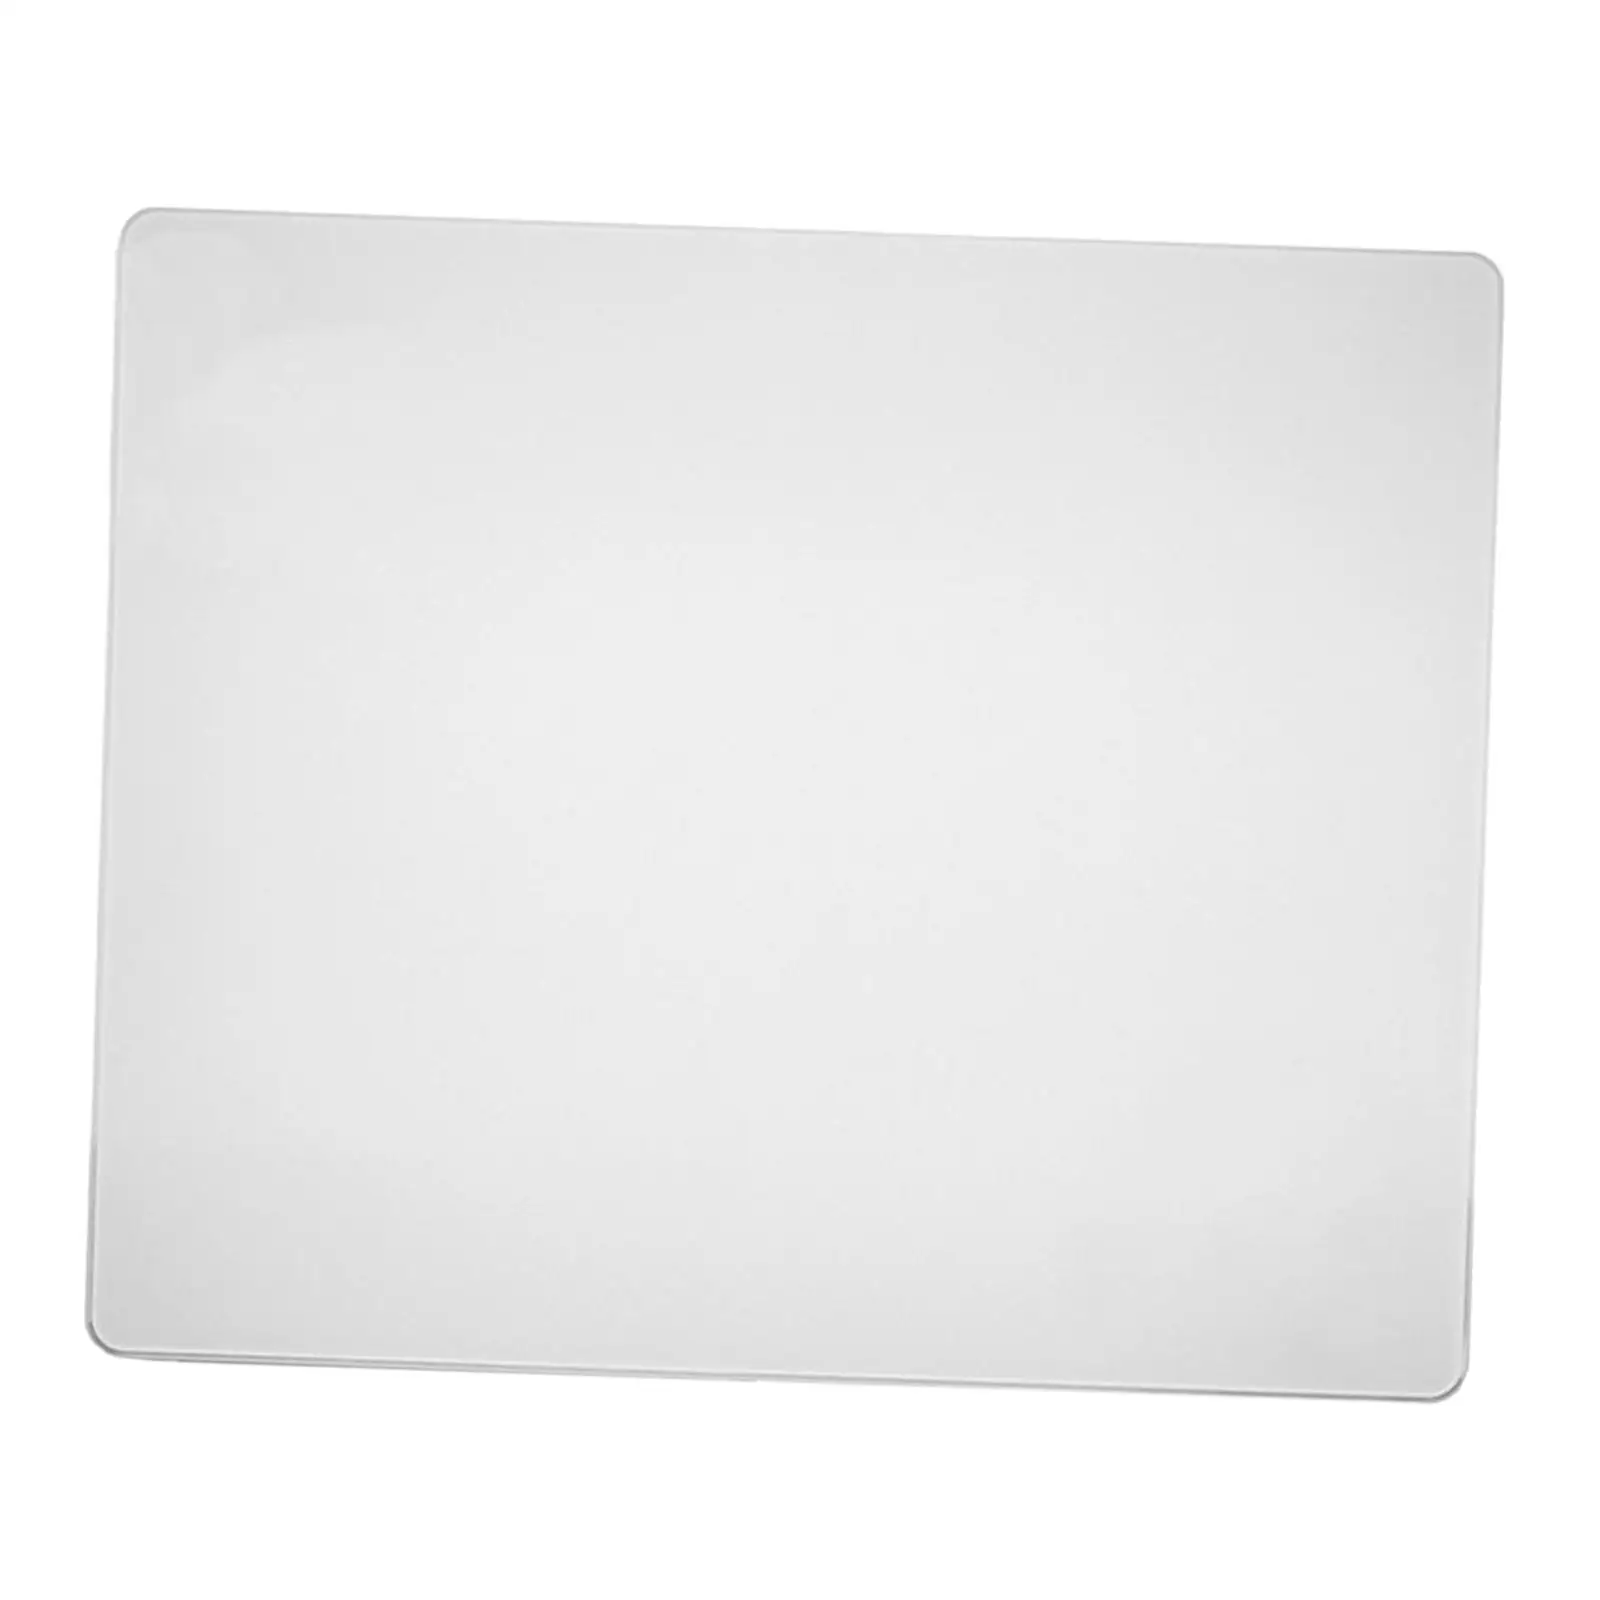 Glass Mouse Pad High Precision and Speed Hard Professional Waterproof Clear Smooth Mouse Mat for Computer Laptop PC Office